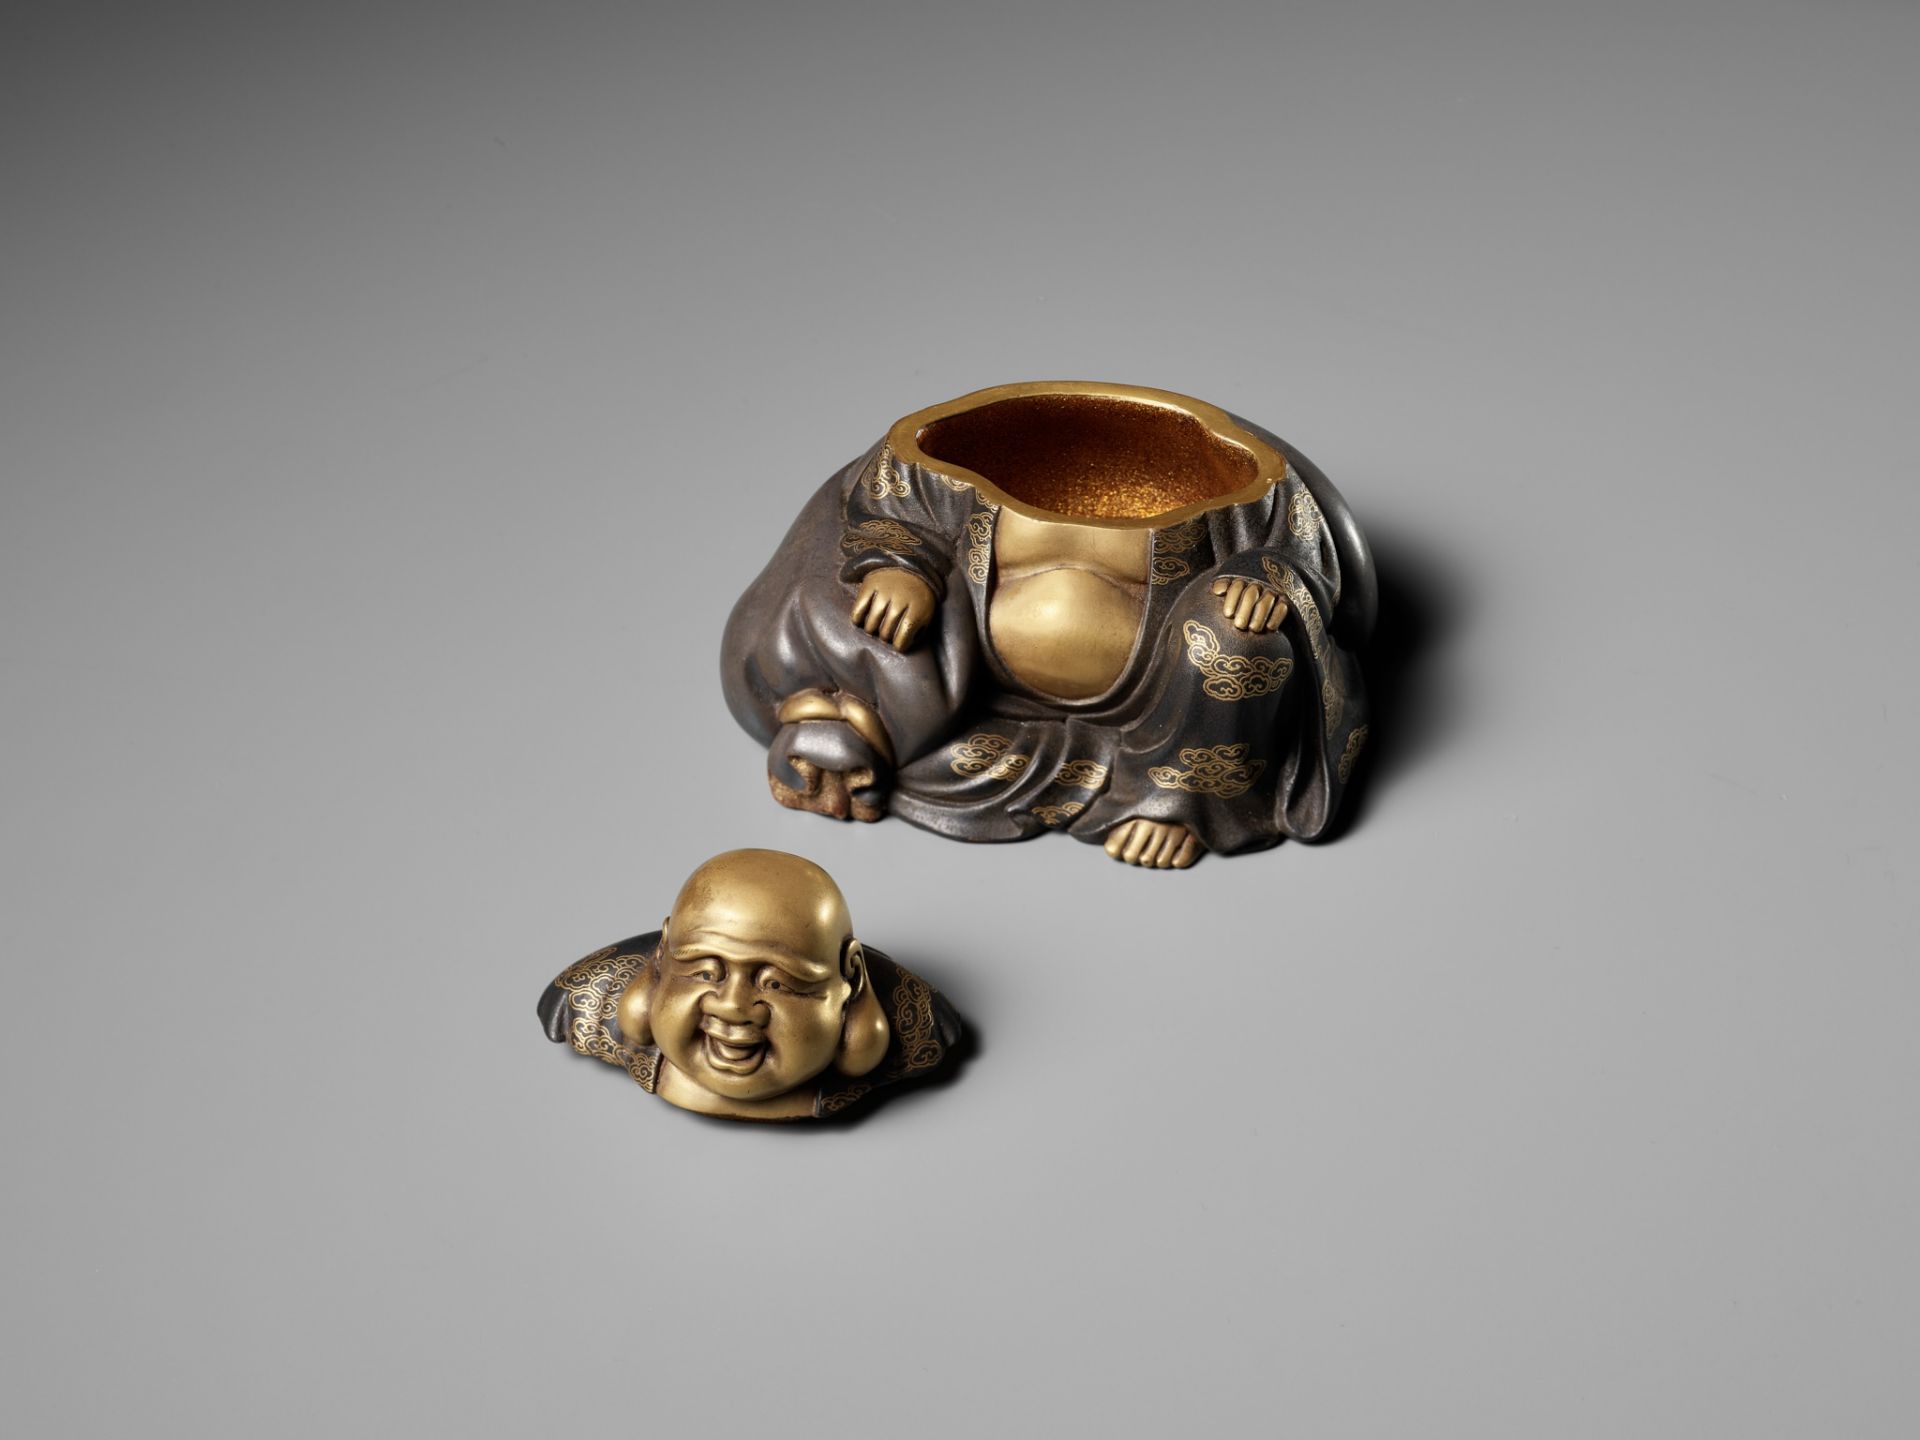 A FINE LACQUER KOGO (INCENSE BOX) AND COVER IN THE FORM OF HOTEI - Image 9 of 9